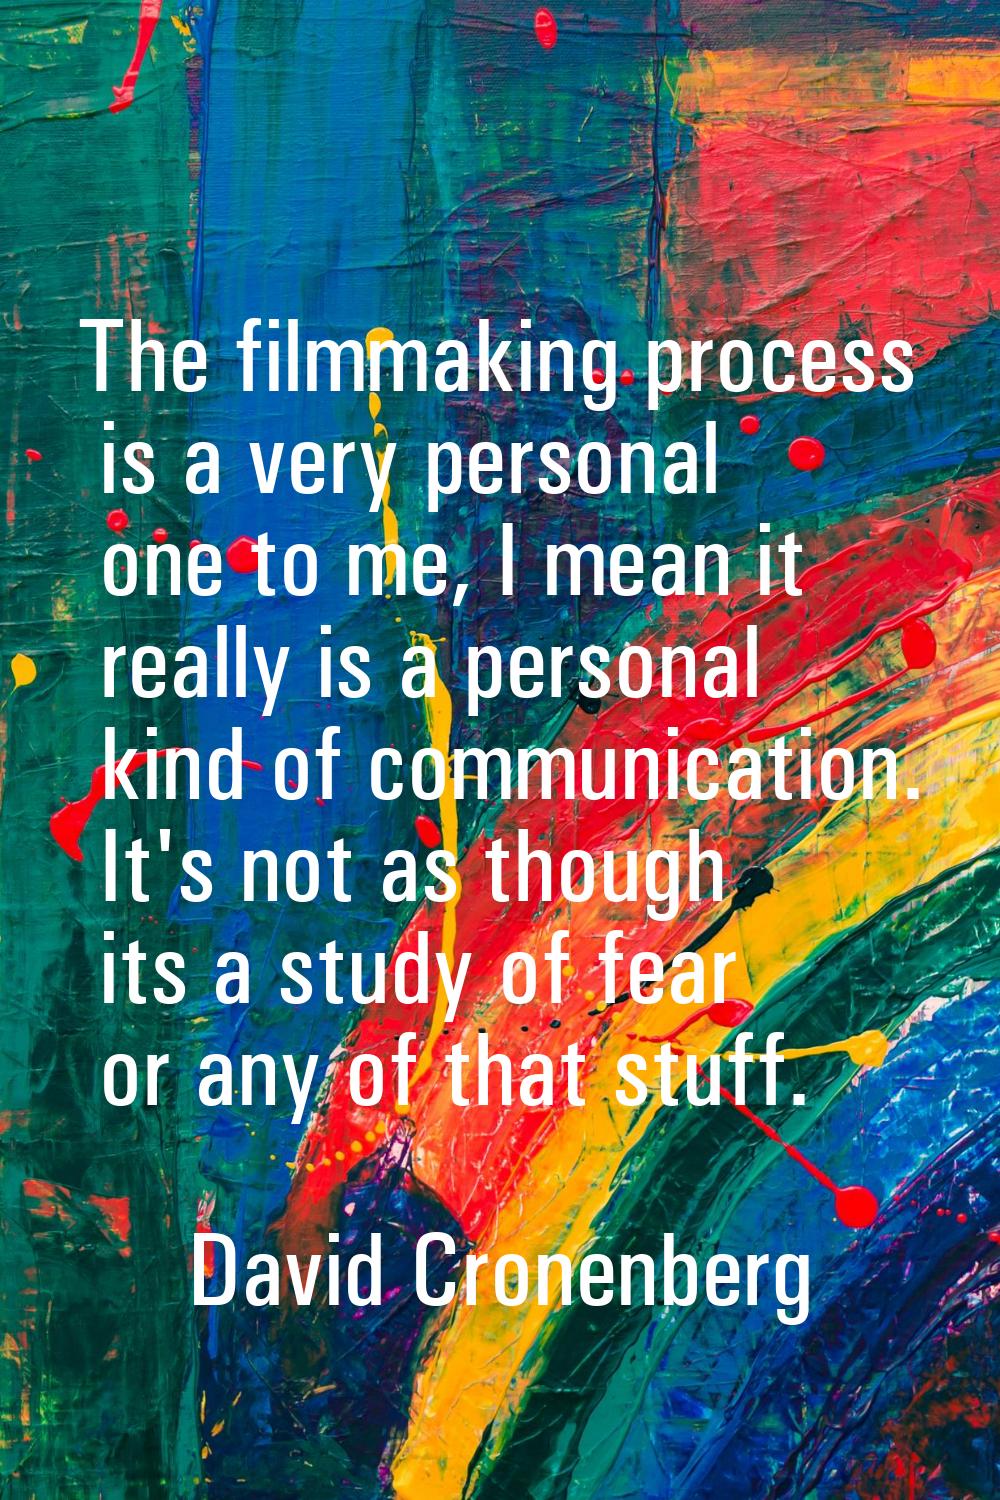 The filmmaking process is a very personal one to me, I mean it really is a personal kind of communi